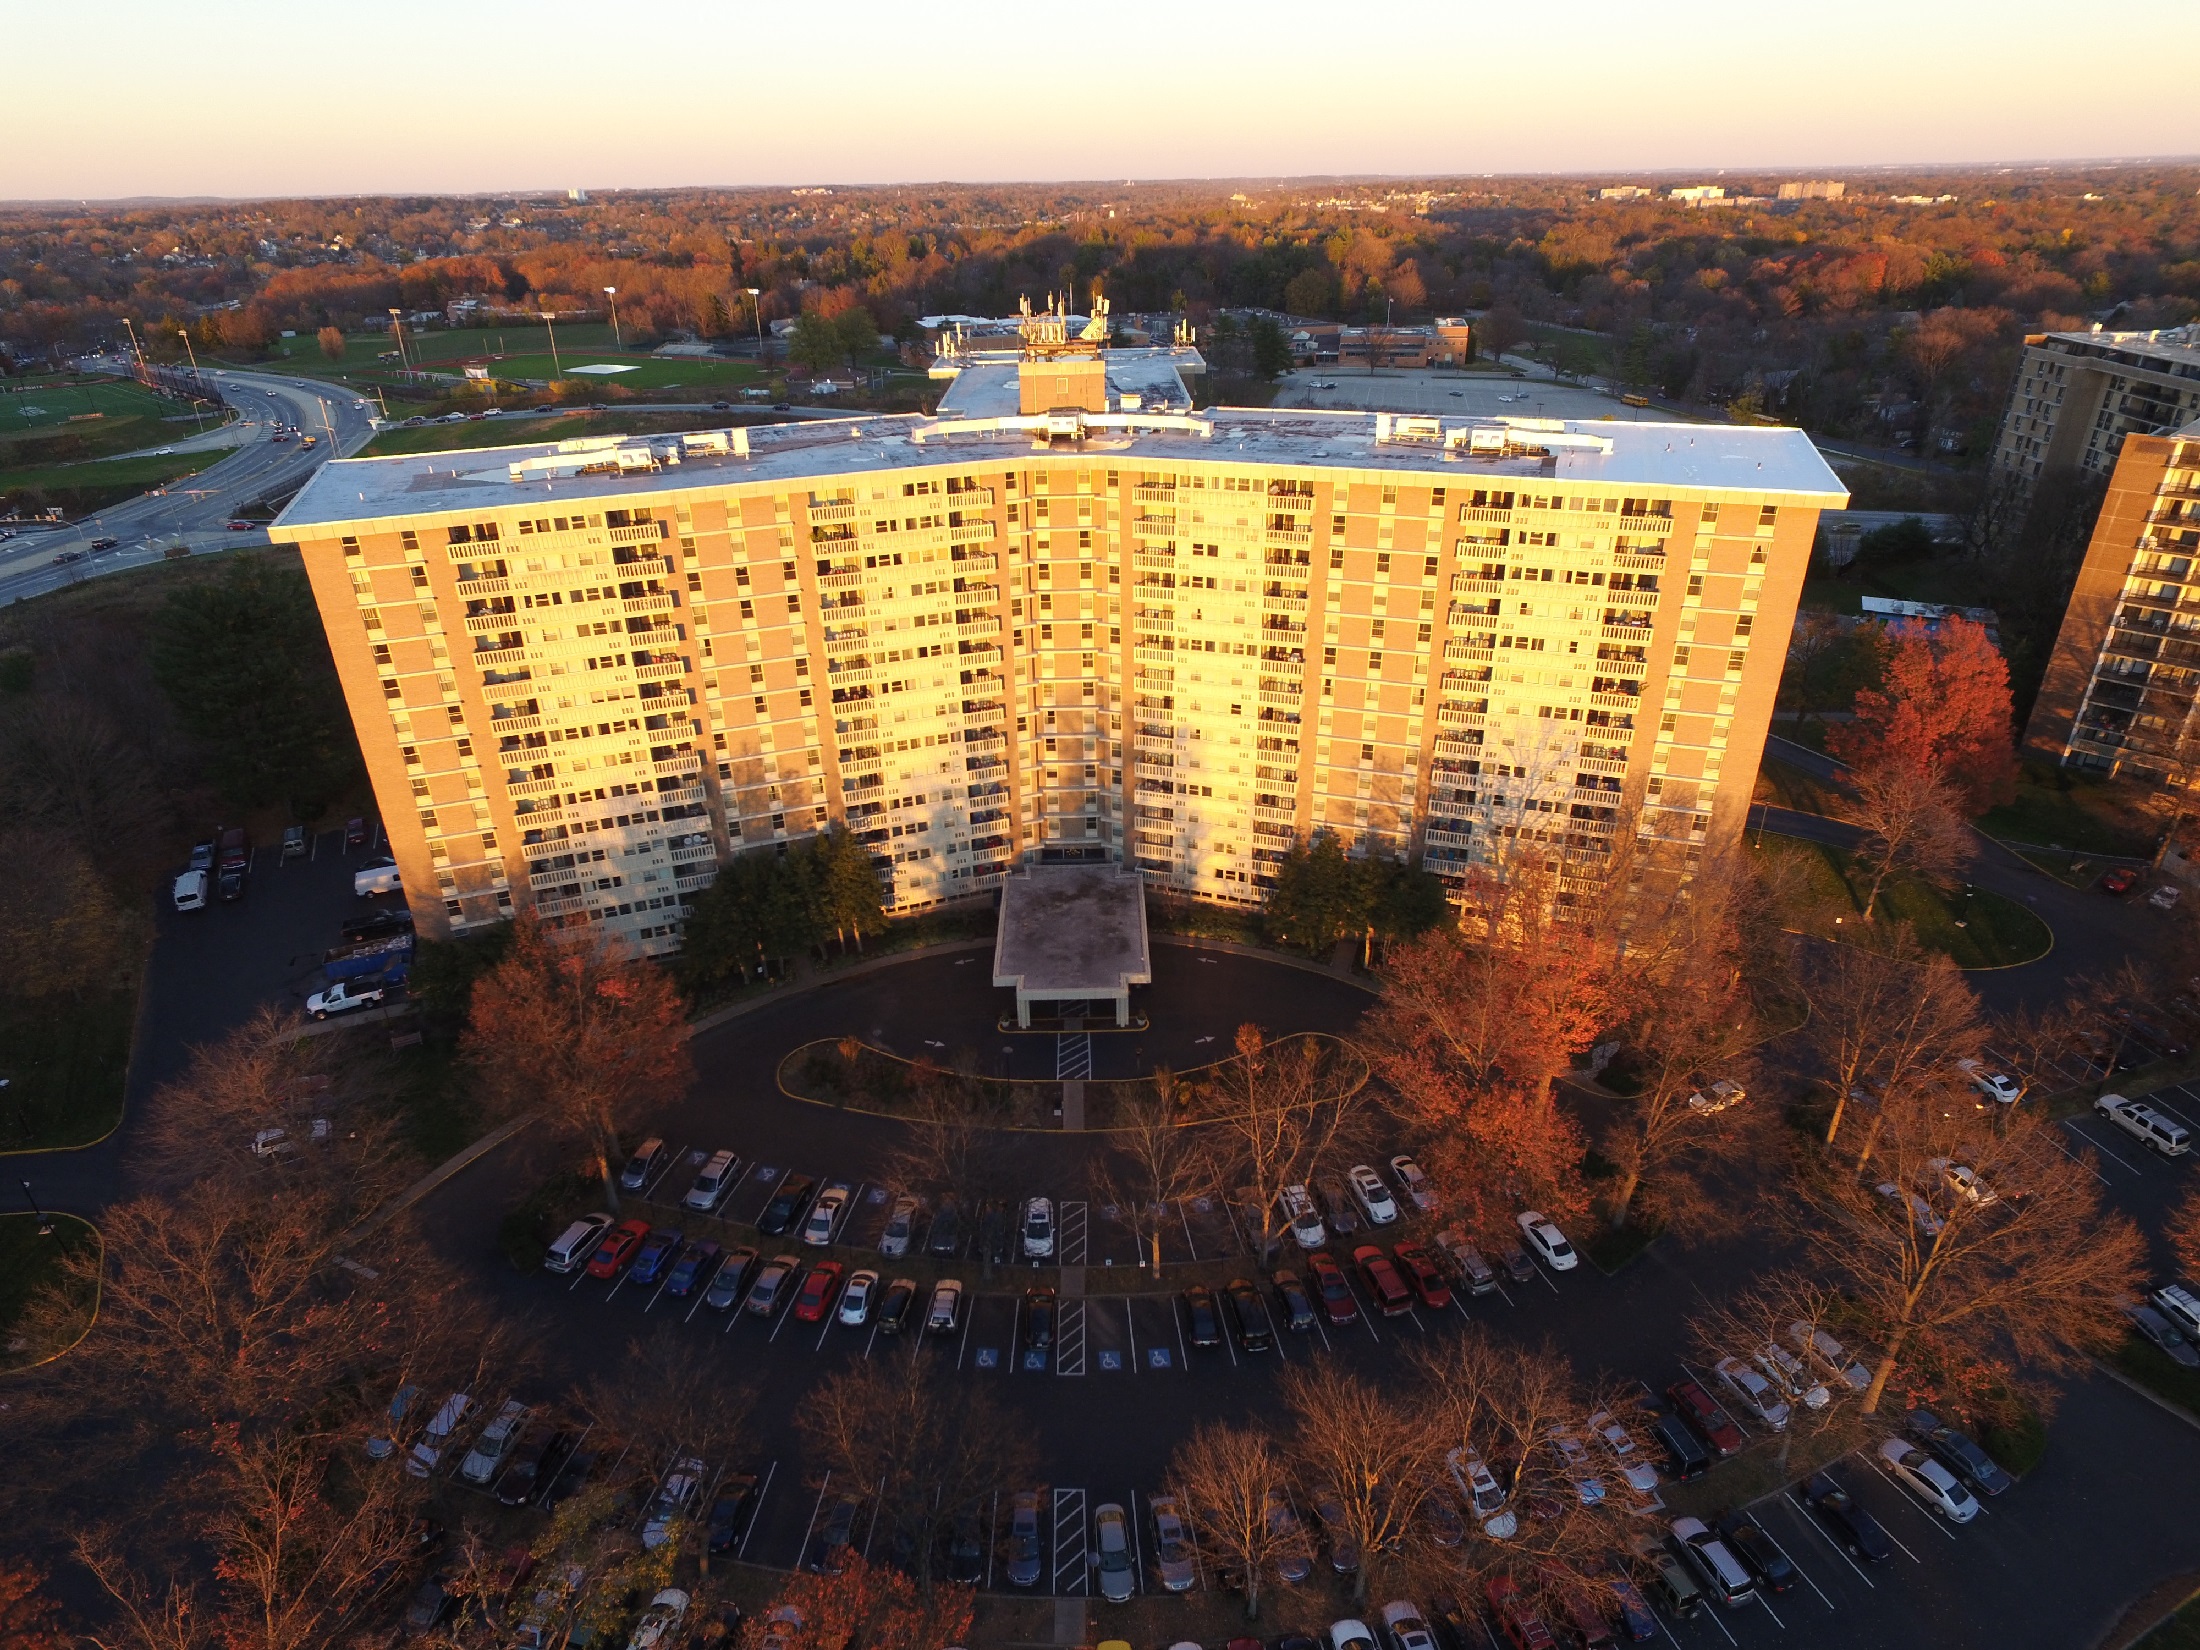 Aerial view of building 3, showing parking spaces and balconies.